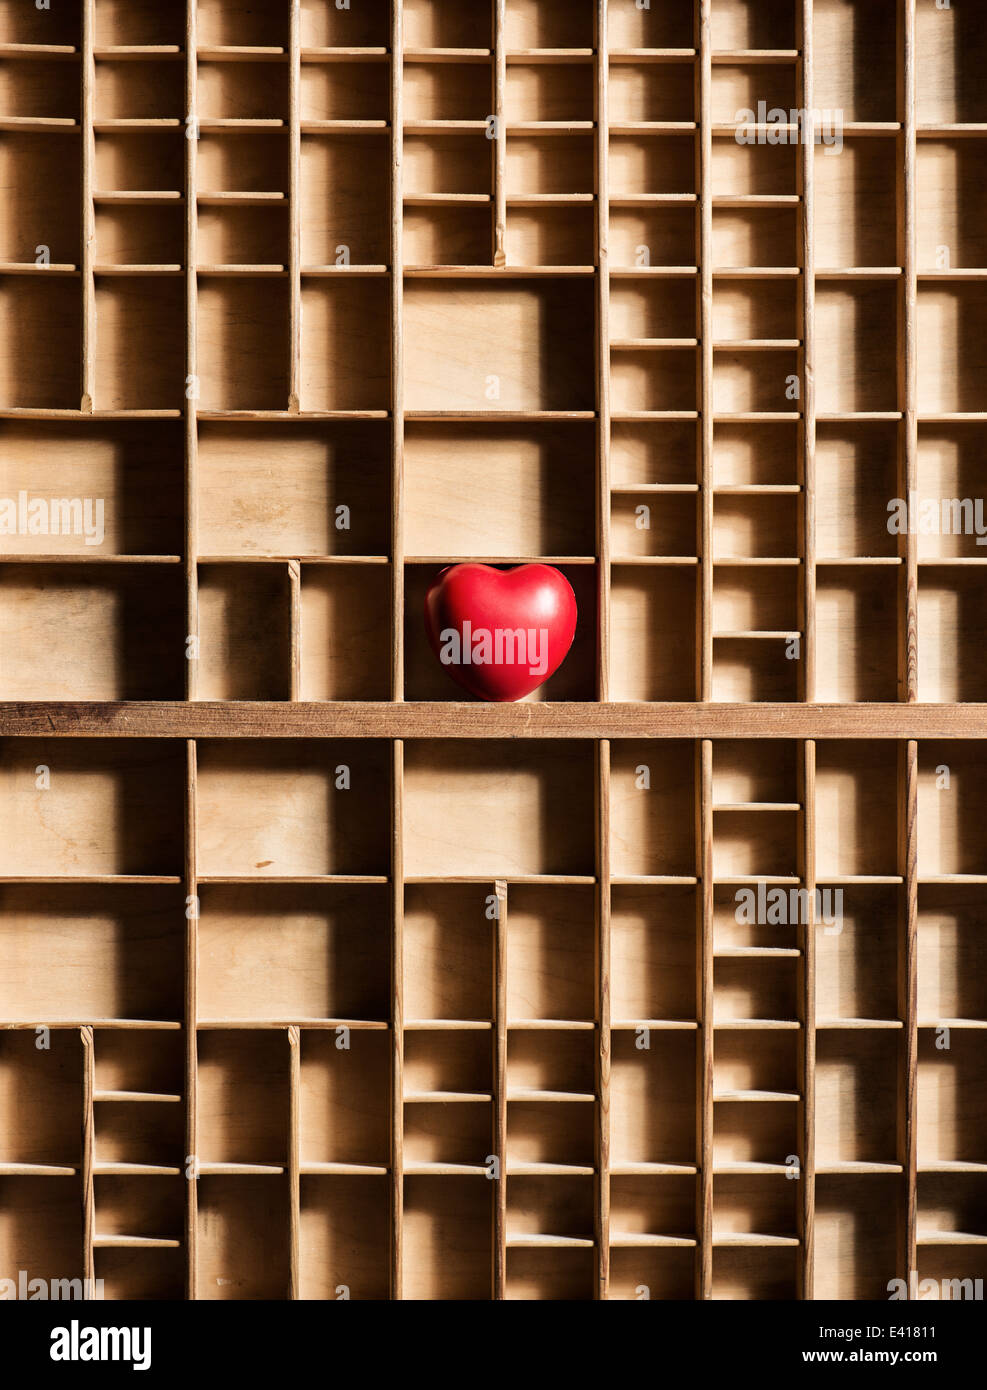 Red heart in empty wooden box with many compartments. Conceptual image of lost love, loneliness and hidden romantic feelings. Stock Photo